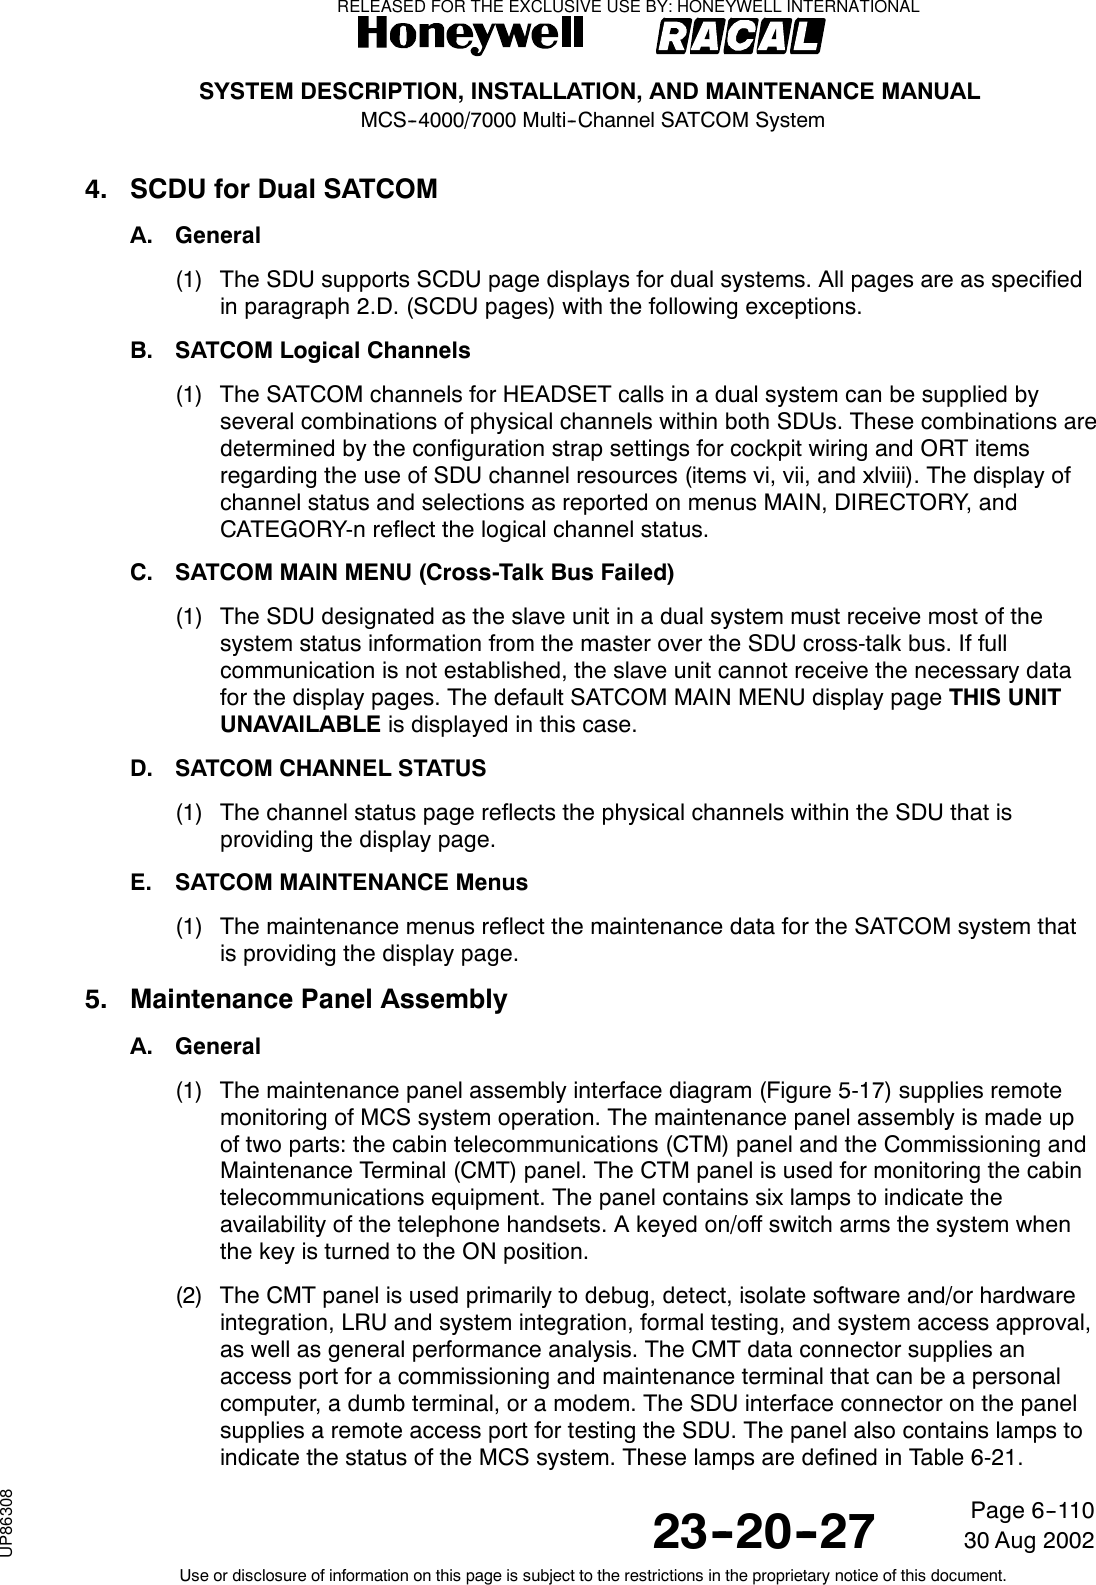 SYSTEM DESCRIPTION, INSTALLATION, AND MAINTENANCE MANUALMCS--4000/7000 Multi--Channel SATCOM System23--20--2730 Aug 2002Use or disclosure of information on this page is subject to the restrictions in the proprietary notice of this document.Page 6--1104. SCDU for Dual SATCOMA. General(1) The SDU supports SCDU page displays for dual systems. All pages are as specifiedin paragraph 2.D. (SCDU pages) with the following exceptions.B. SATCOM Logical Channels(1) The SATCOM channels for HEADSET calls in a dual system can be supplied byseveral combinations of physical channels within both SDUs. These combinations aredetermined by the configuration strap settings for cockpit wiring and ORT itemsregarding the use of SDU channel resources (items vi, vii, and xlviii). The display ofchannel status and selections as reported on menus MAIN, DIRECTORY, andCATEGORY-n reflect the logical channel status.C. SATCOM MAIN MENU (Cross-Talk Bus Failed)(1) The SDU designated as the slave unit in a dual system must receive most of thesystem status information from the master over the SDU cross-talk bus. If fullcommunication is not established, the slave unit cannot receive the necessary datafor the display pages. The default SATCOM MAIN MENU display page THIS UNITUNAVAILABLE is displayed in this case.D. SATCOM CHANNEL STATUS(1) The channel status page reflects the physical channels within the SDU that isproviding the display page.E. SATCOM MAINTENANCE Menus(1) The maintenance menus reflect the maintenance data for the SATCOM system thatis providing the display page.5. Maintenance Panel AssemblyA. General(1) The maintenance panel assembly interface diagram (Figure 5-17) supplies remotemonitoring of MCS system operation. The maintenance panel assembly is made upof two parts: the cabin telecommunications (CTM) panel and the Commissioning andMaintenance Terminal (CMT) panel. The CTM panel is used for monitoring the cabintelecommunications equipment. The panel contains six lamps to indicate theavailability of the telephone handsets. A keyed on/off switch arms the system whenthe key is turned to the ON position.(2) The CMT panel is used primarily to debug, detect, isolate software and/or hardwareintegration, LRU and system integration, formal testing, and system access approval,as well as general performance analysis. The CMT data connector supplies anaccess port for a commissioning and maintenance terminal that can be a personalcomputer, a dumb terminal, or a modem. The SDU interface connector on the panelsupplies a remote access port for testing the SDU. The panel also contains lamps toindicate the status of the MCS system. These lamps are defined in Table 6-21.RELEASED FOR THE EXCLUSIVE USE BY: HONEYWELL INTERNATIONALUP86308